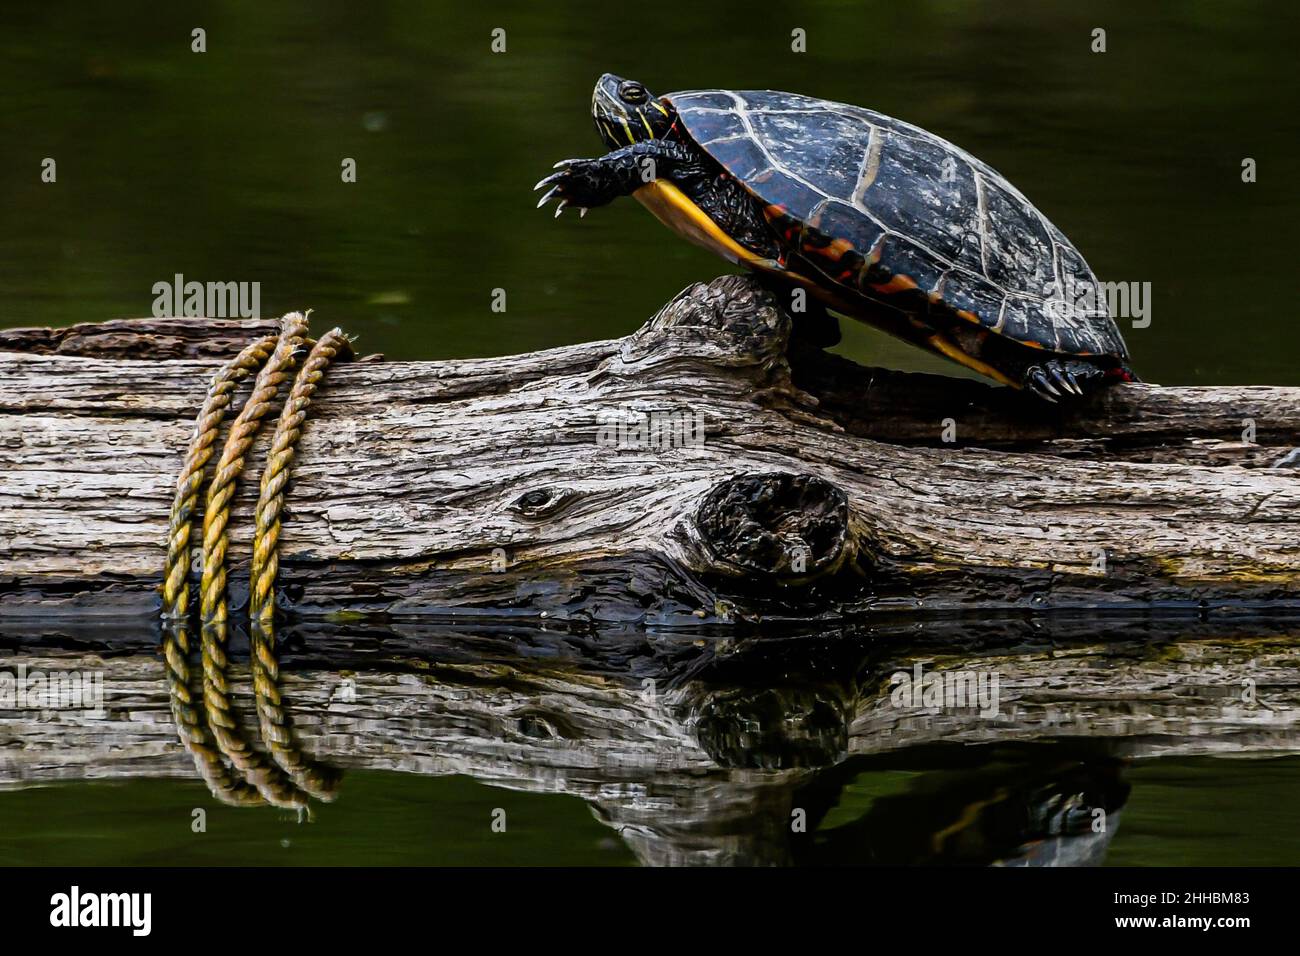 Here is a photo of a turtle in an awkward position basking in the sunshine at Richard M Nixon County Park, York County, Pennsylvania USA Stock Photo